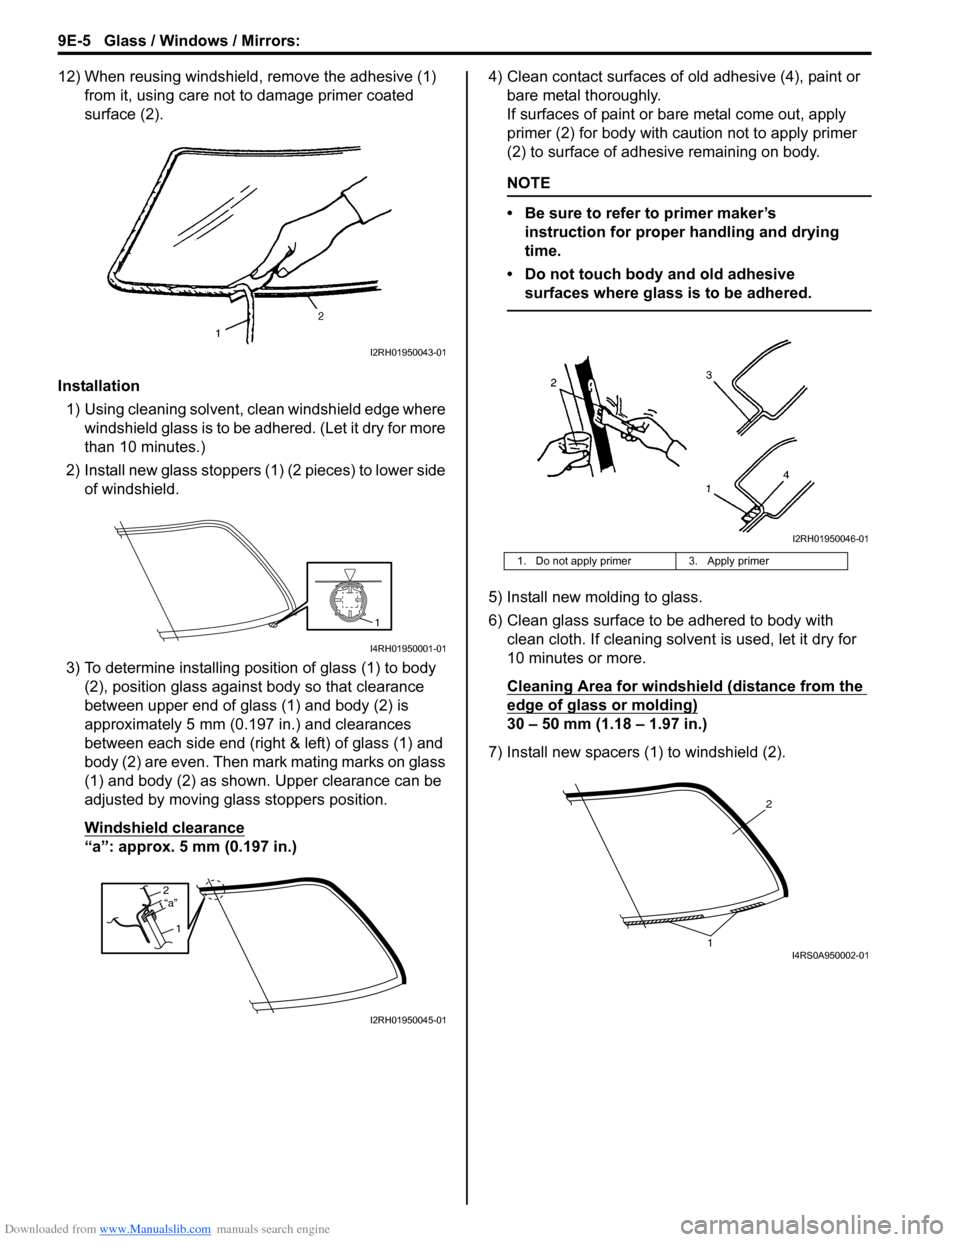 SUZUKI SWIFT 2008 2.G Service Workshop Manual Downloaded from www.Manualslib.com manuals search engine 9E-5 Glass / Windows / Mirrors: 
12) When reusing windshield, remove the adhesive (1) from it, using care not to damage primer coated 
surface 